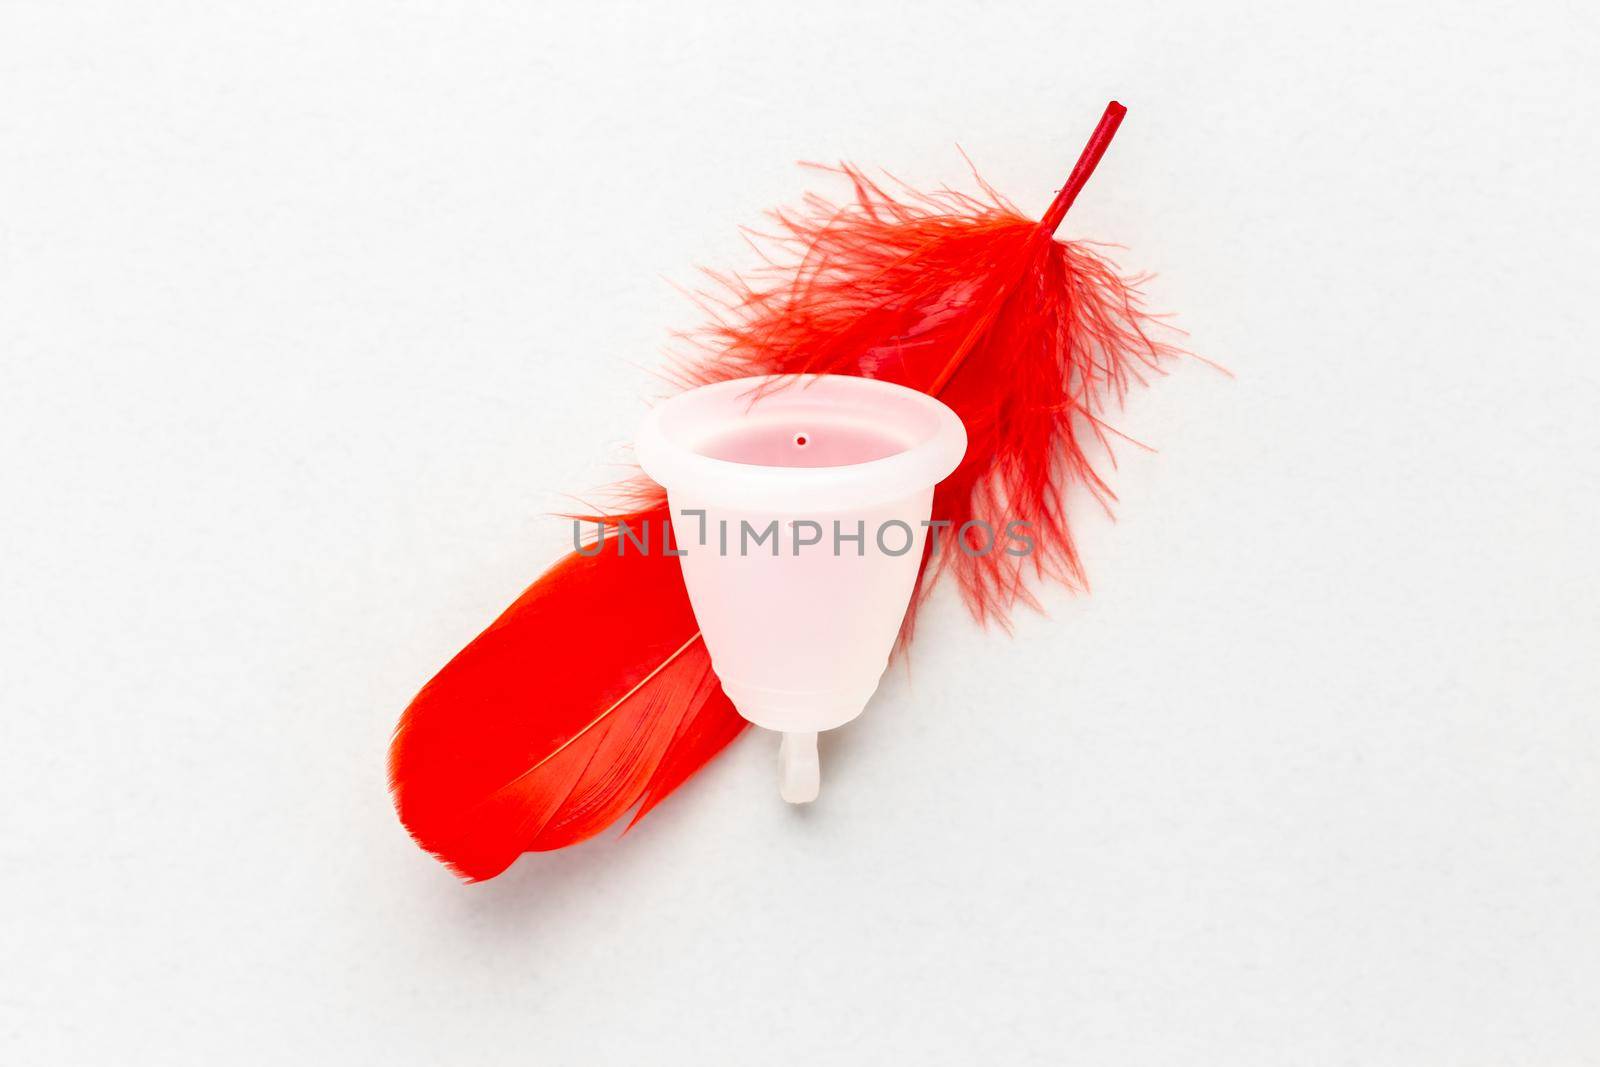 Menstrual cup with red feather over grey background. Periods hygiene product, zero waste alternatives